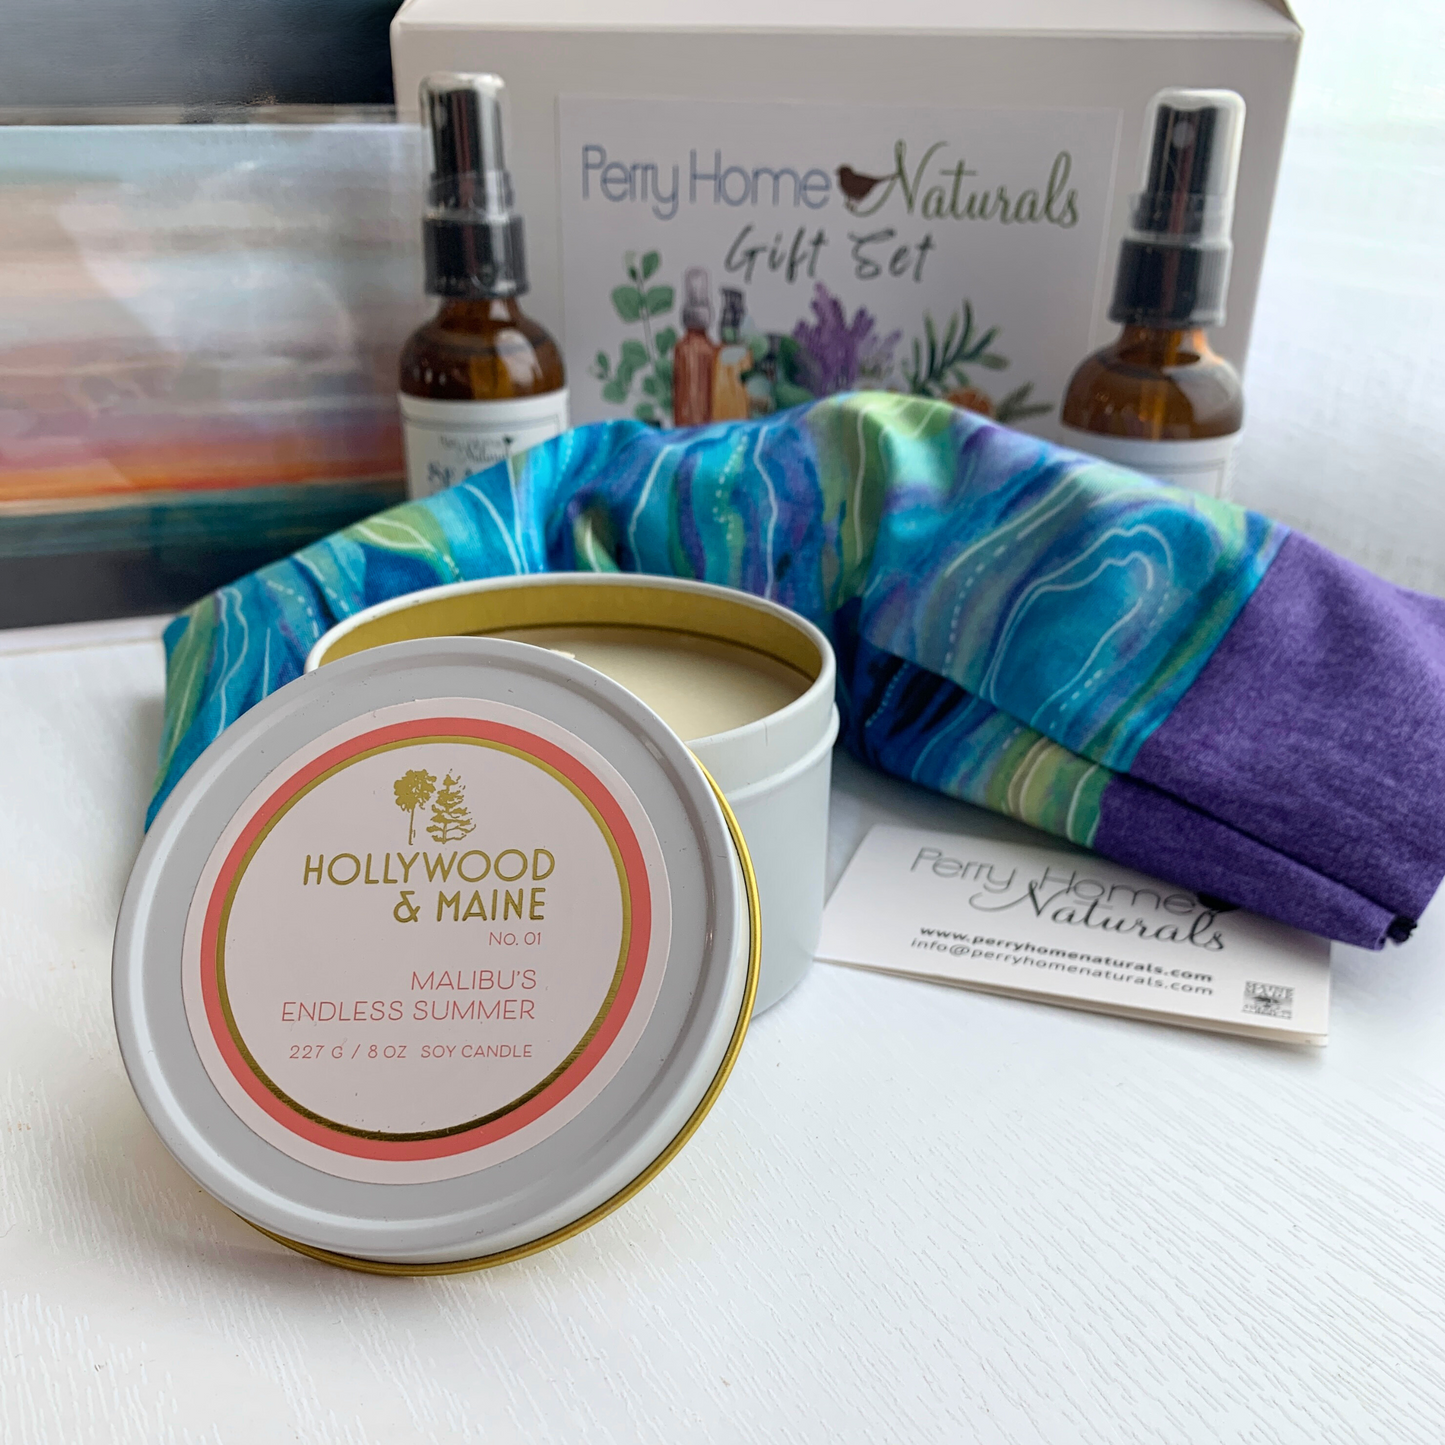 Warm and Summery, Beach Inspired Gift Set - Handmade Products by Maine Artisans